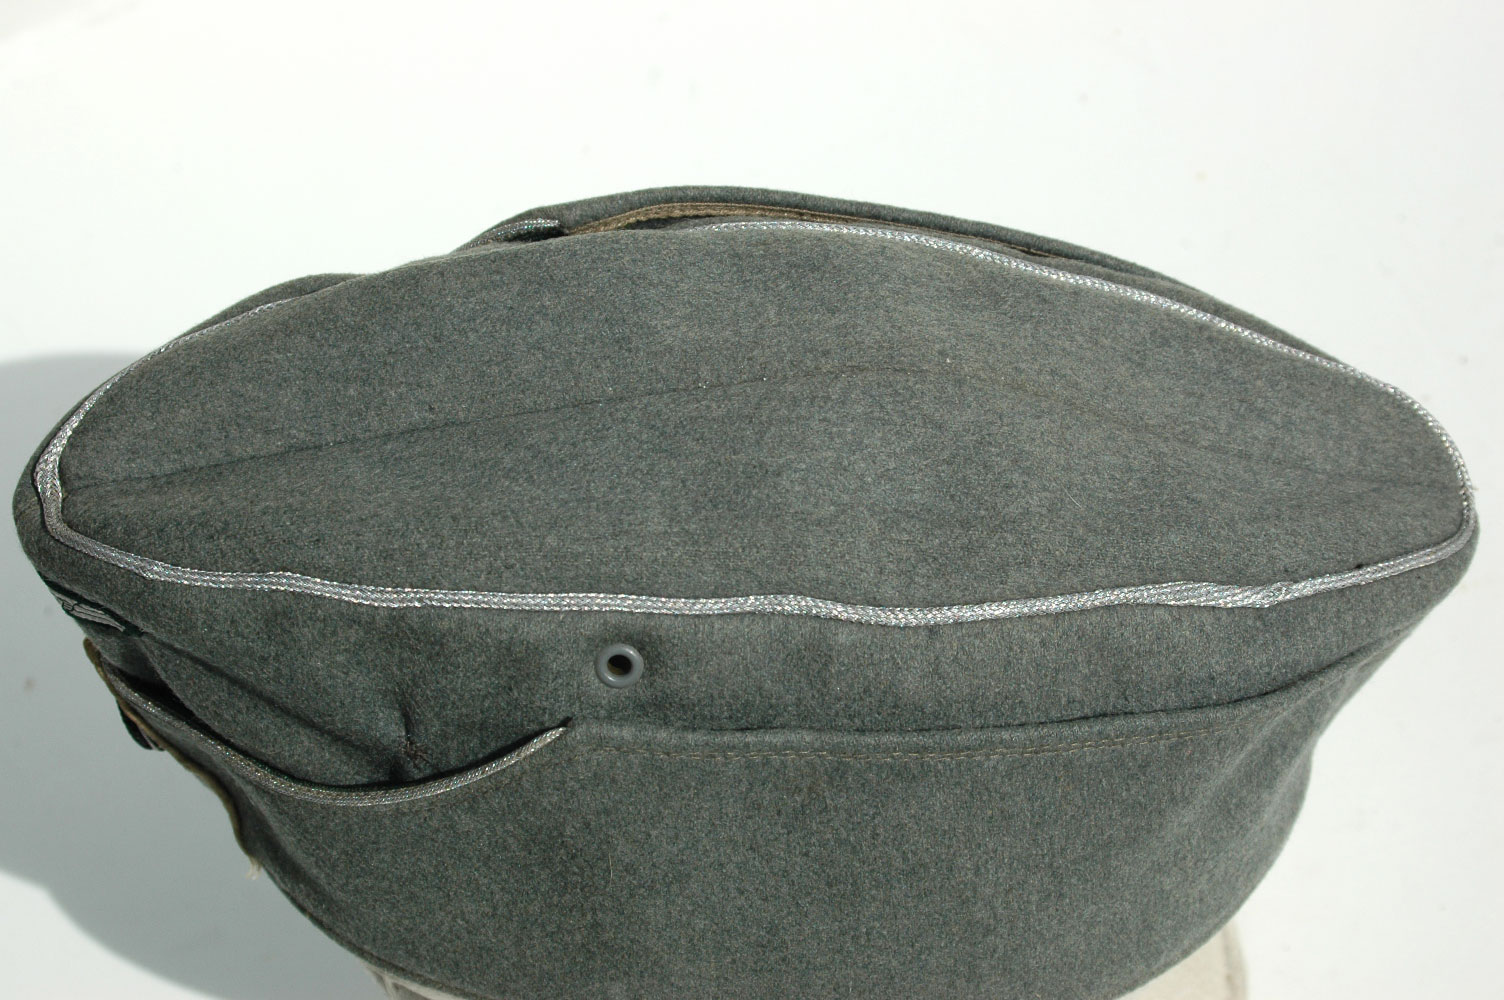 Army (HEER) officers M38 Overseas Cap for Infantry